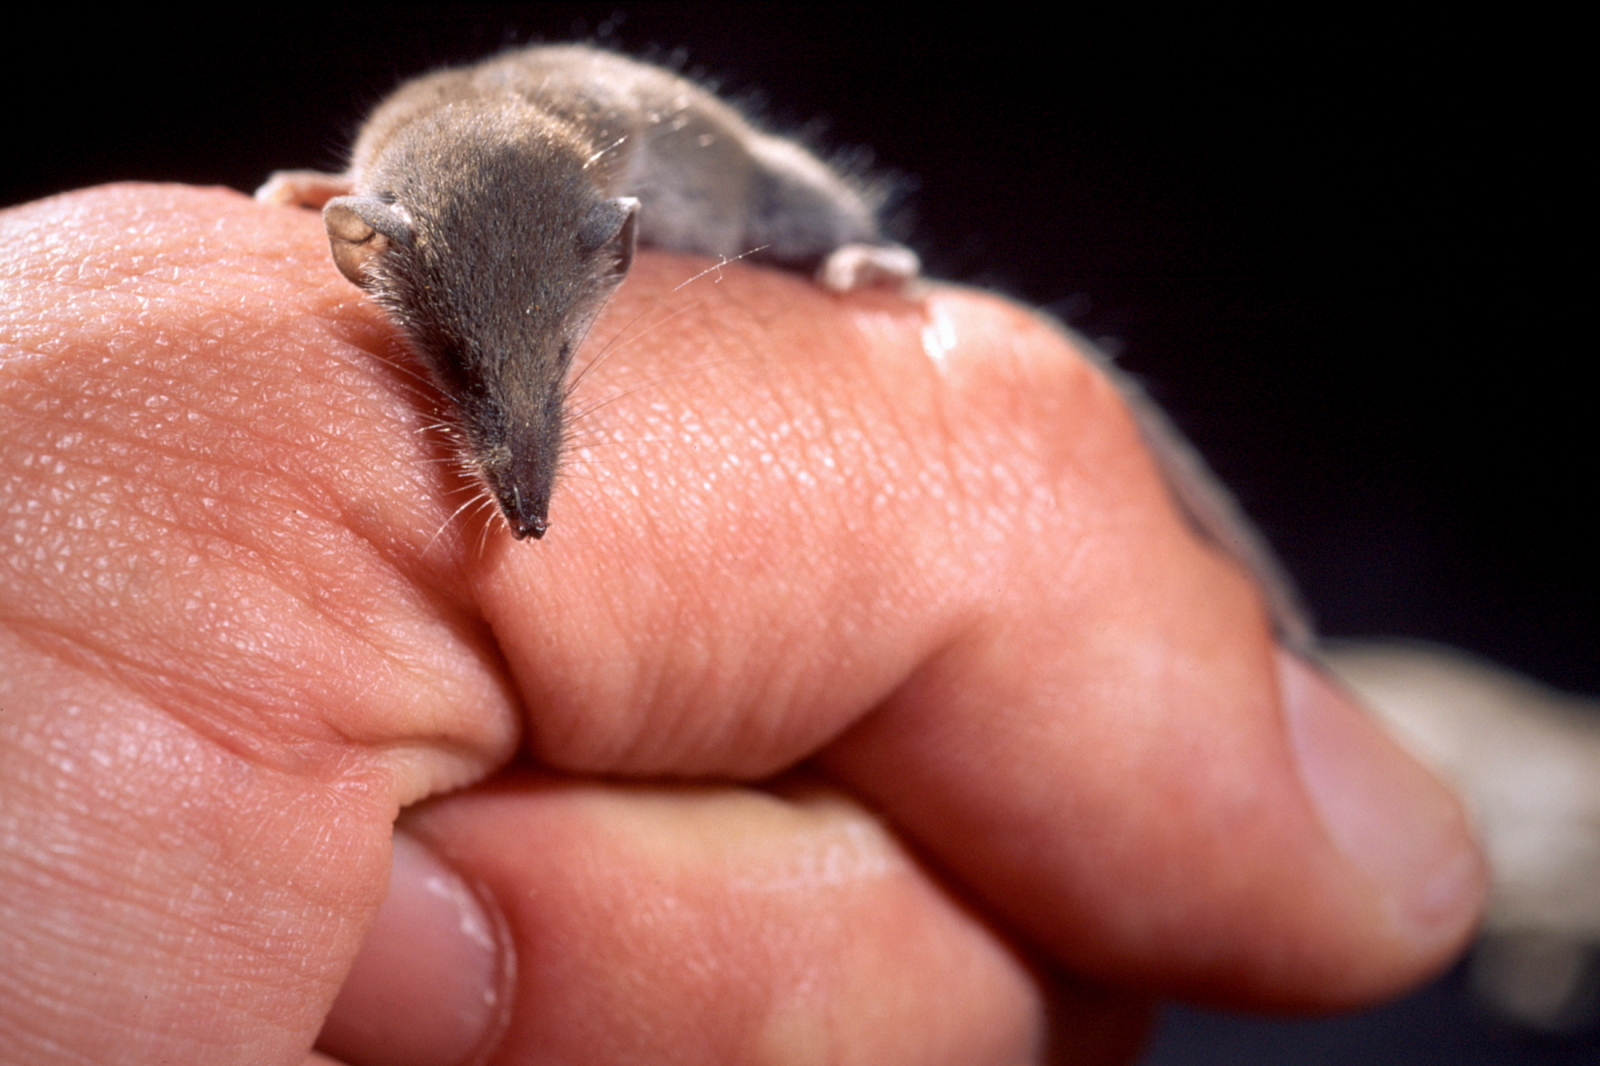 What is the smallest shrew?